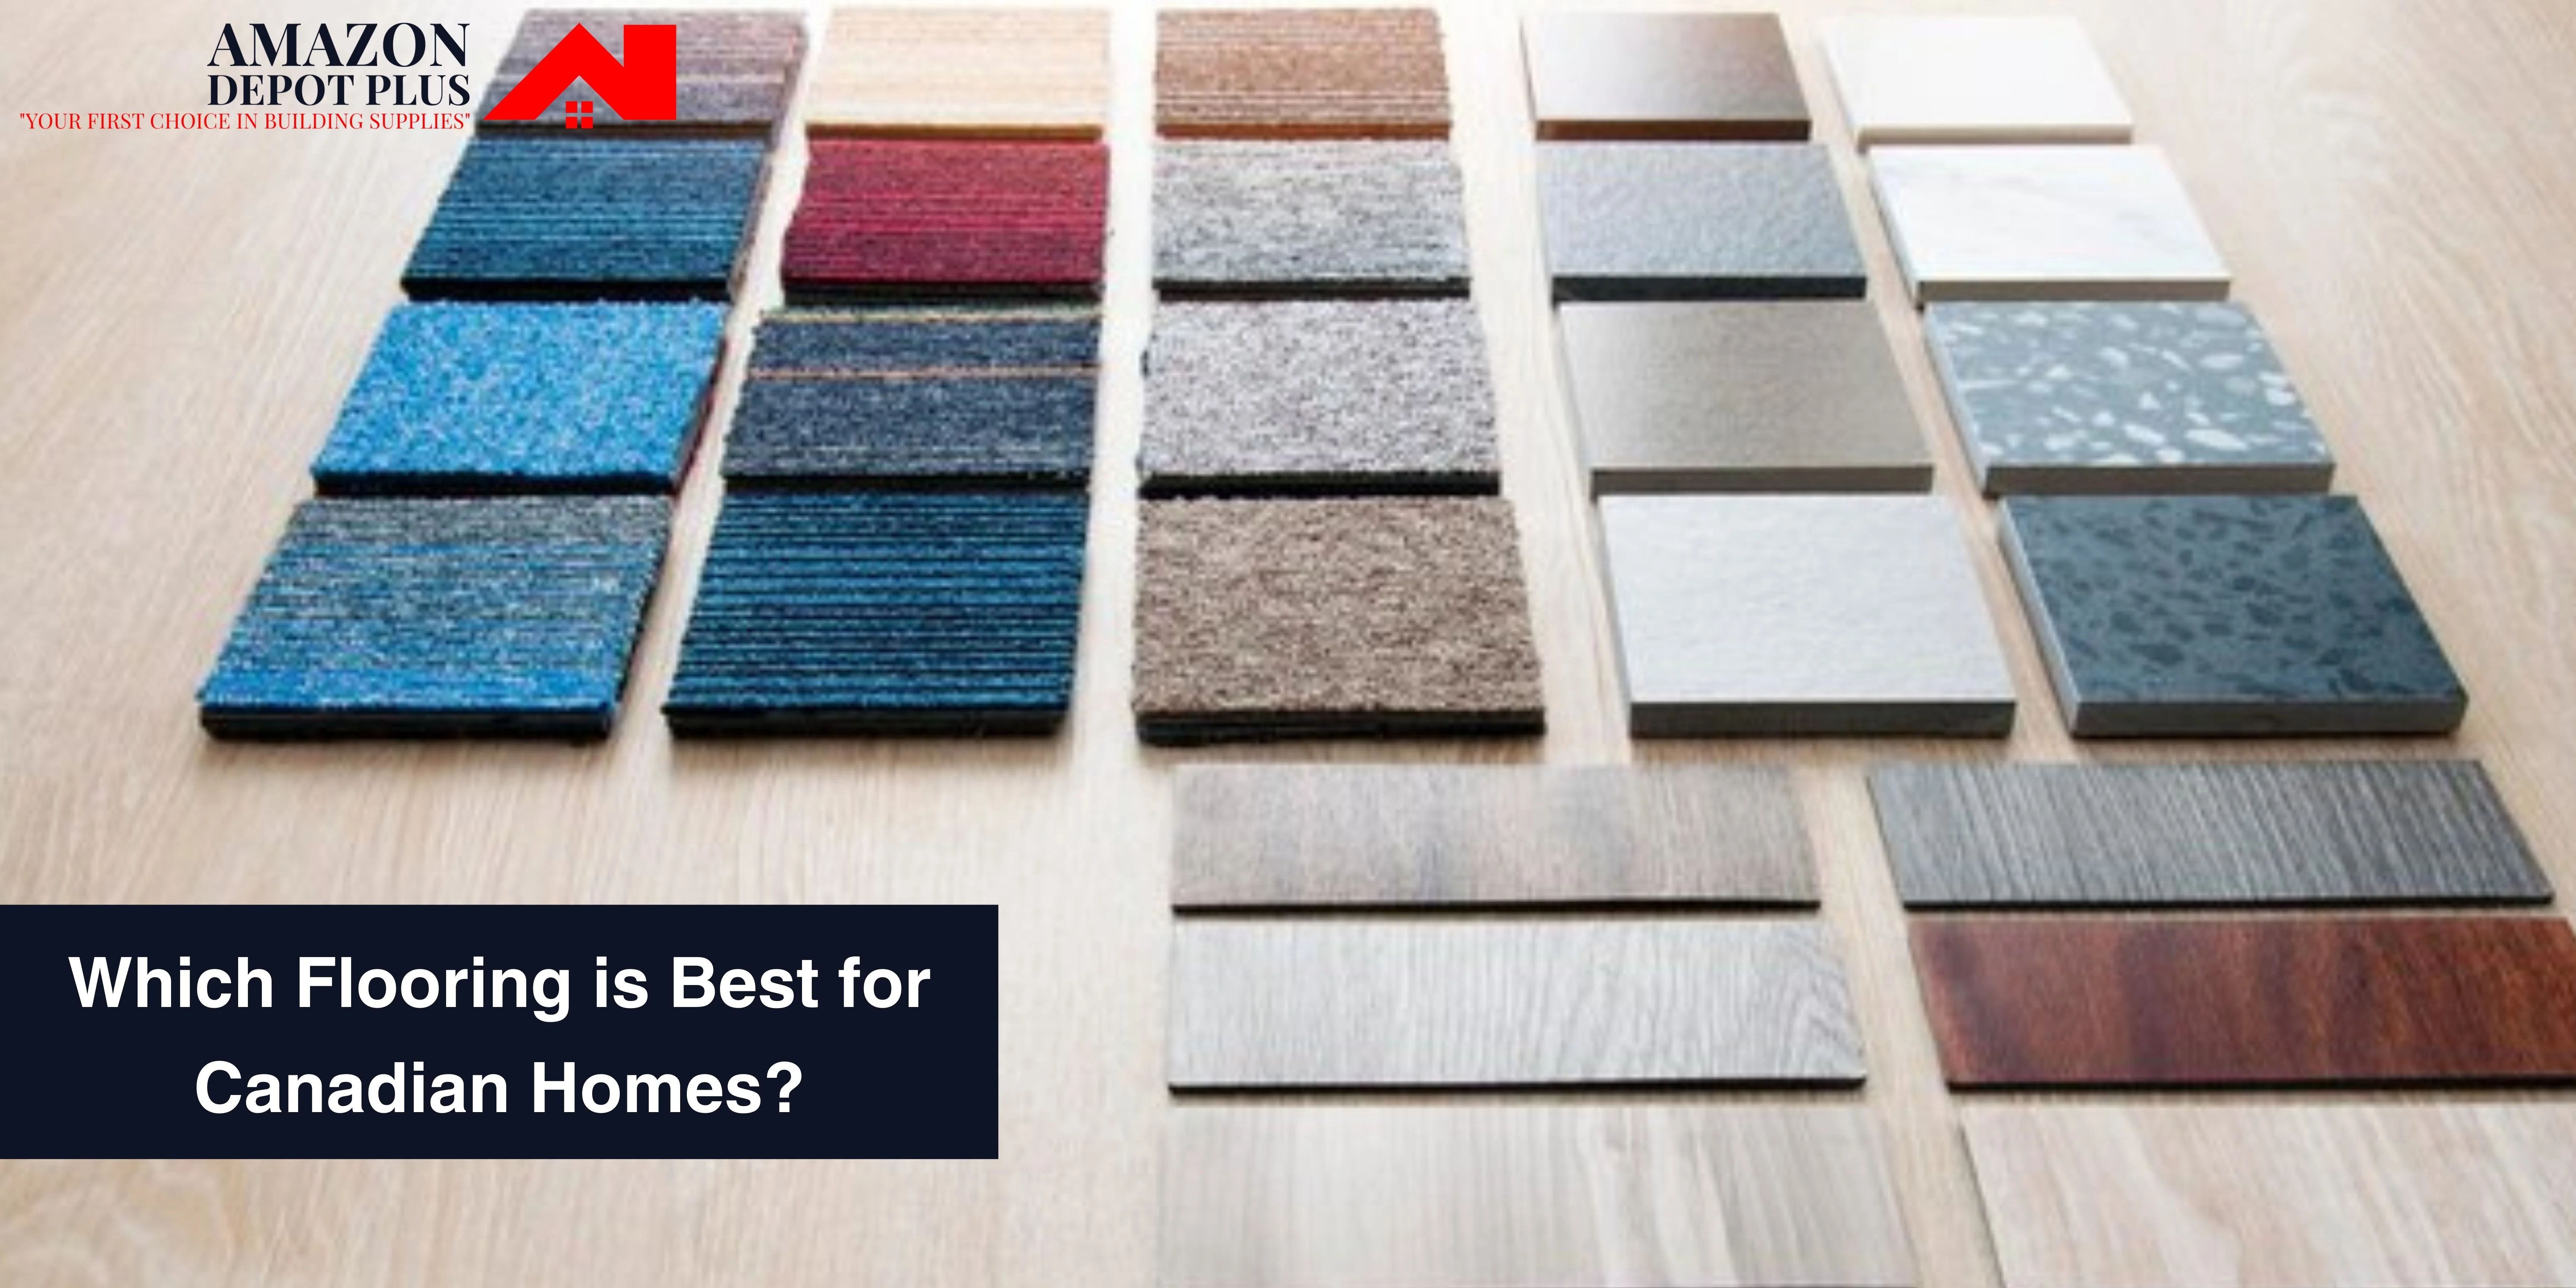 Which Flooring is Best for Canadian Homes?